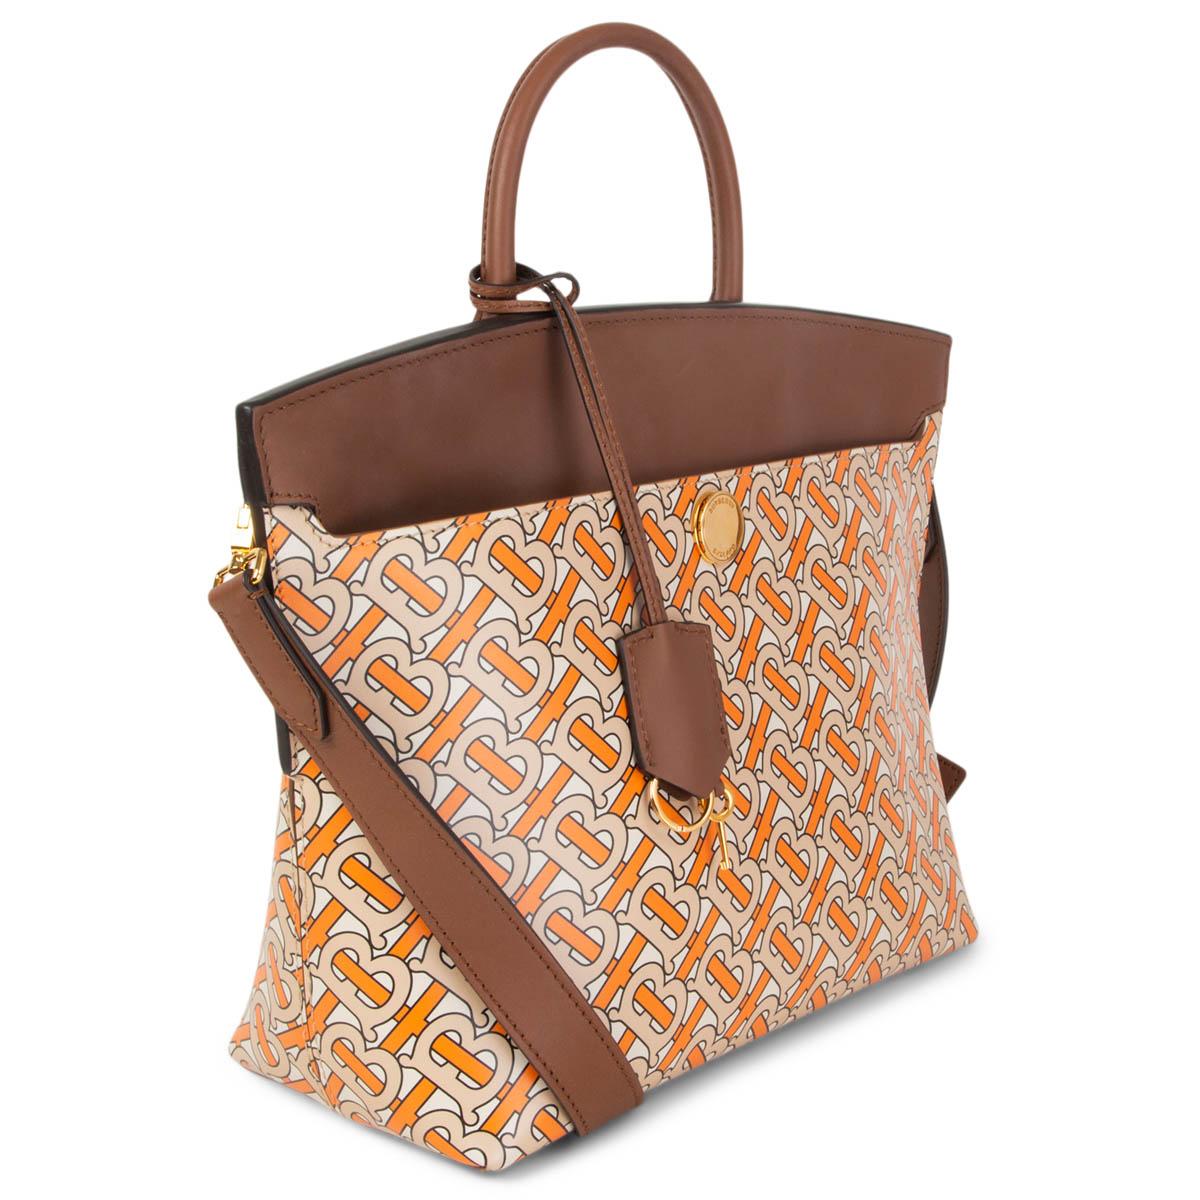 100% authentic Burberry Society top handle shoulder bag in pale beige, orange and black printed calfskin with brown flap, handles and shoulder strap. Lined in brown suede with one open pocket against the back. Comes with a detachable shoulder strap,